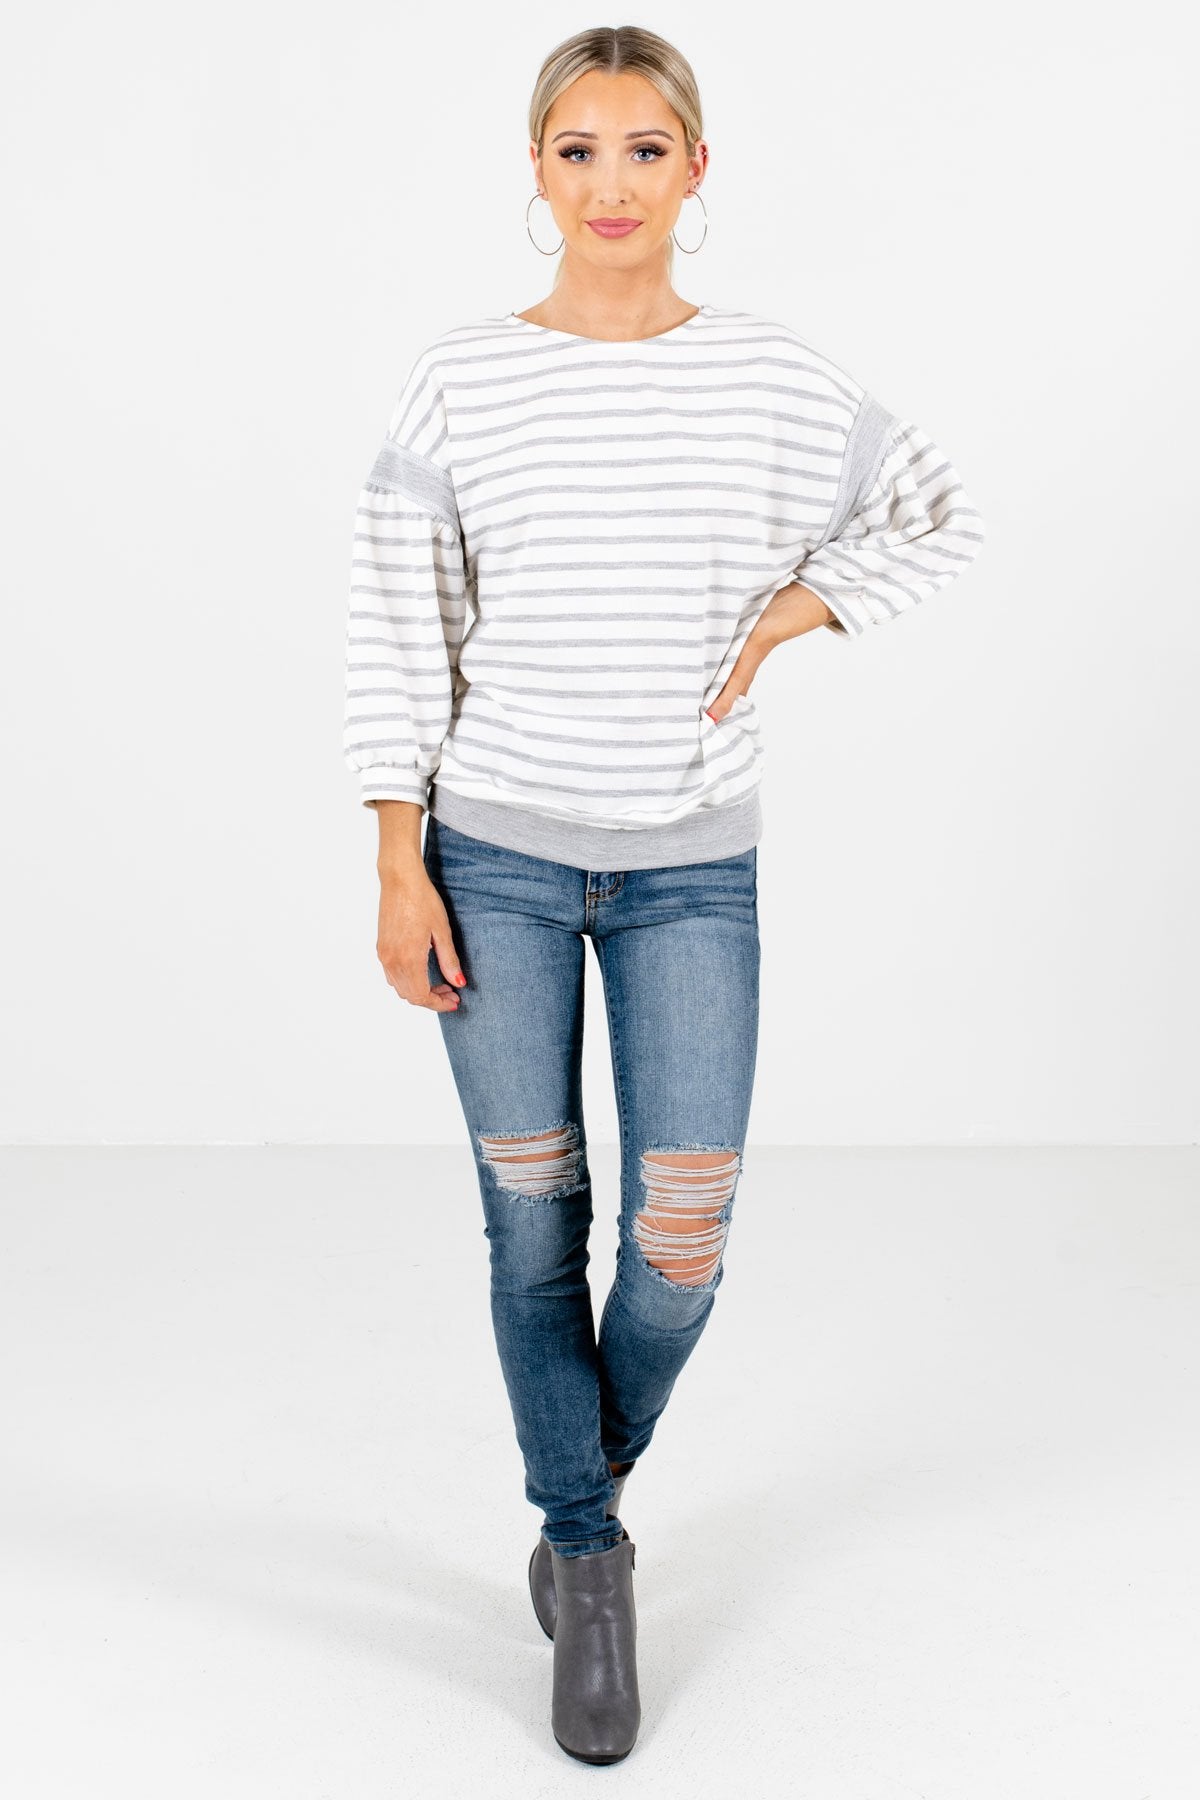 Women's White Fall and Winter Boutique Clothing